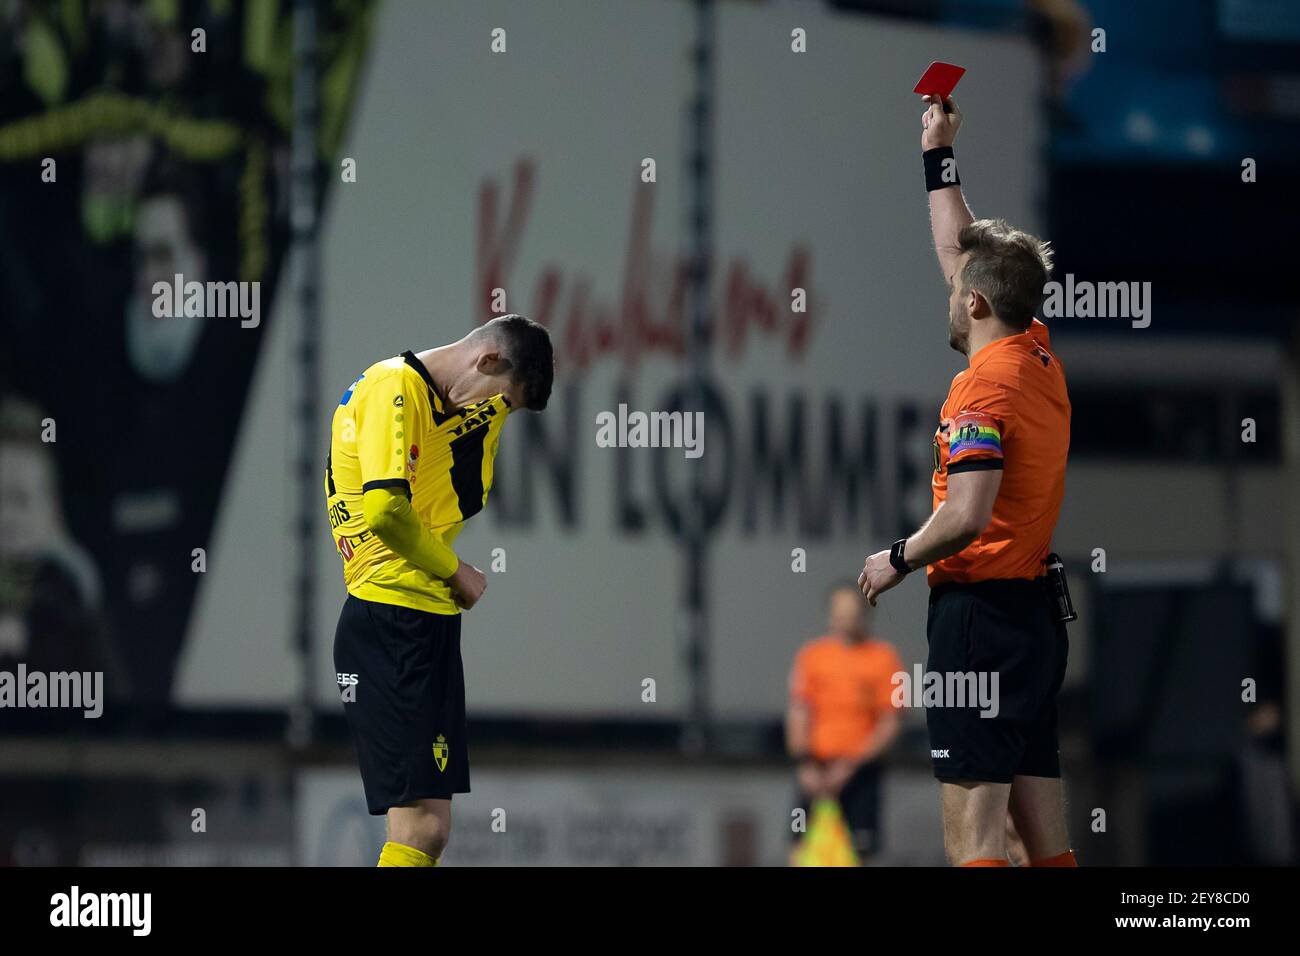 Lierse's Jordy Gillekens receives a red card from the referee during a soccer match between Lierse Kempenzonen and Union Saint-Gilloise, Friday 05 Mar Stock Photo